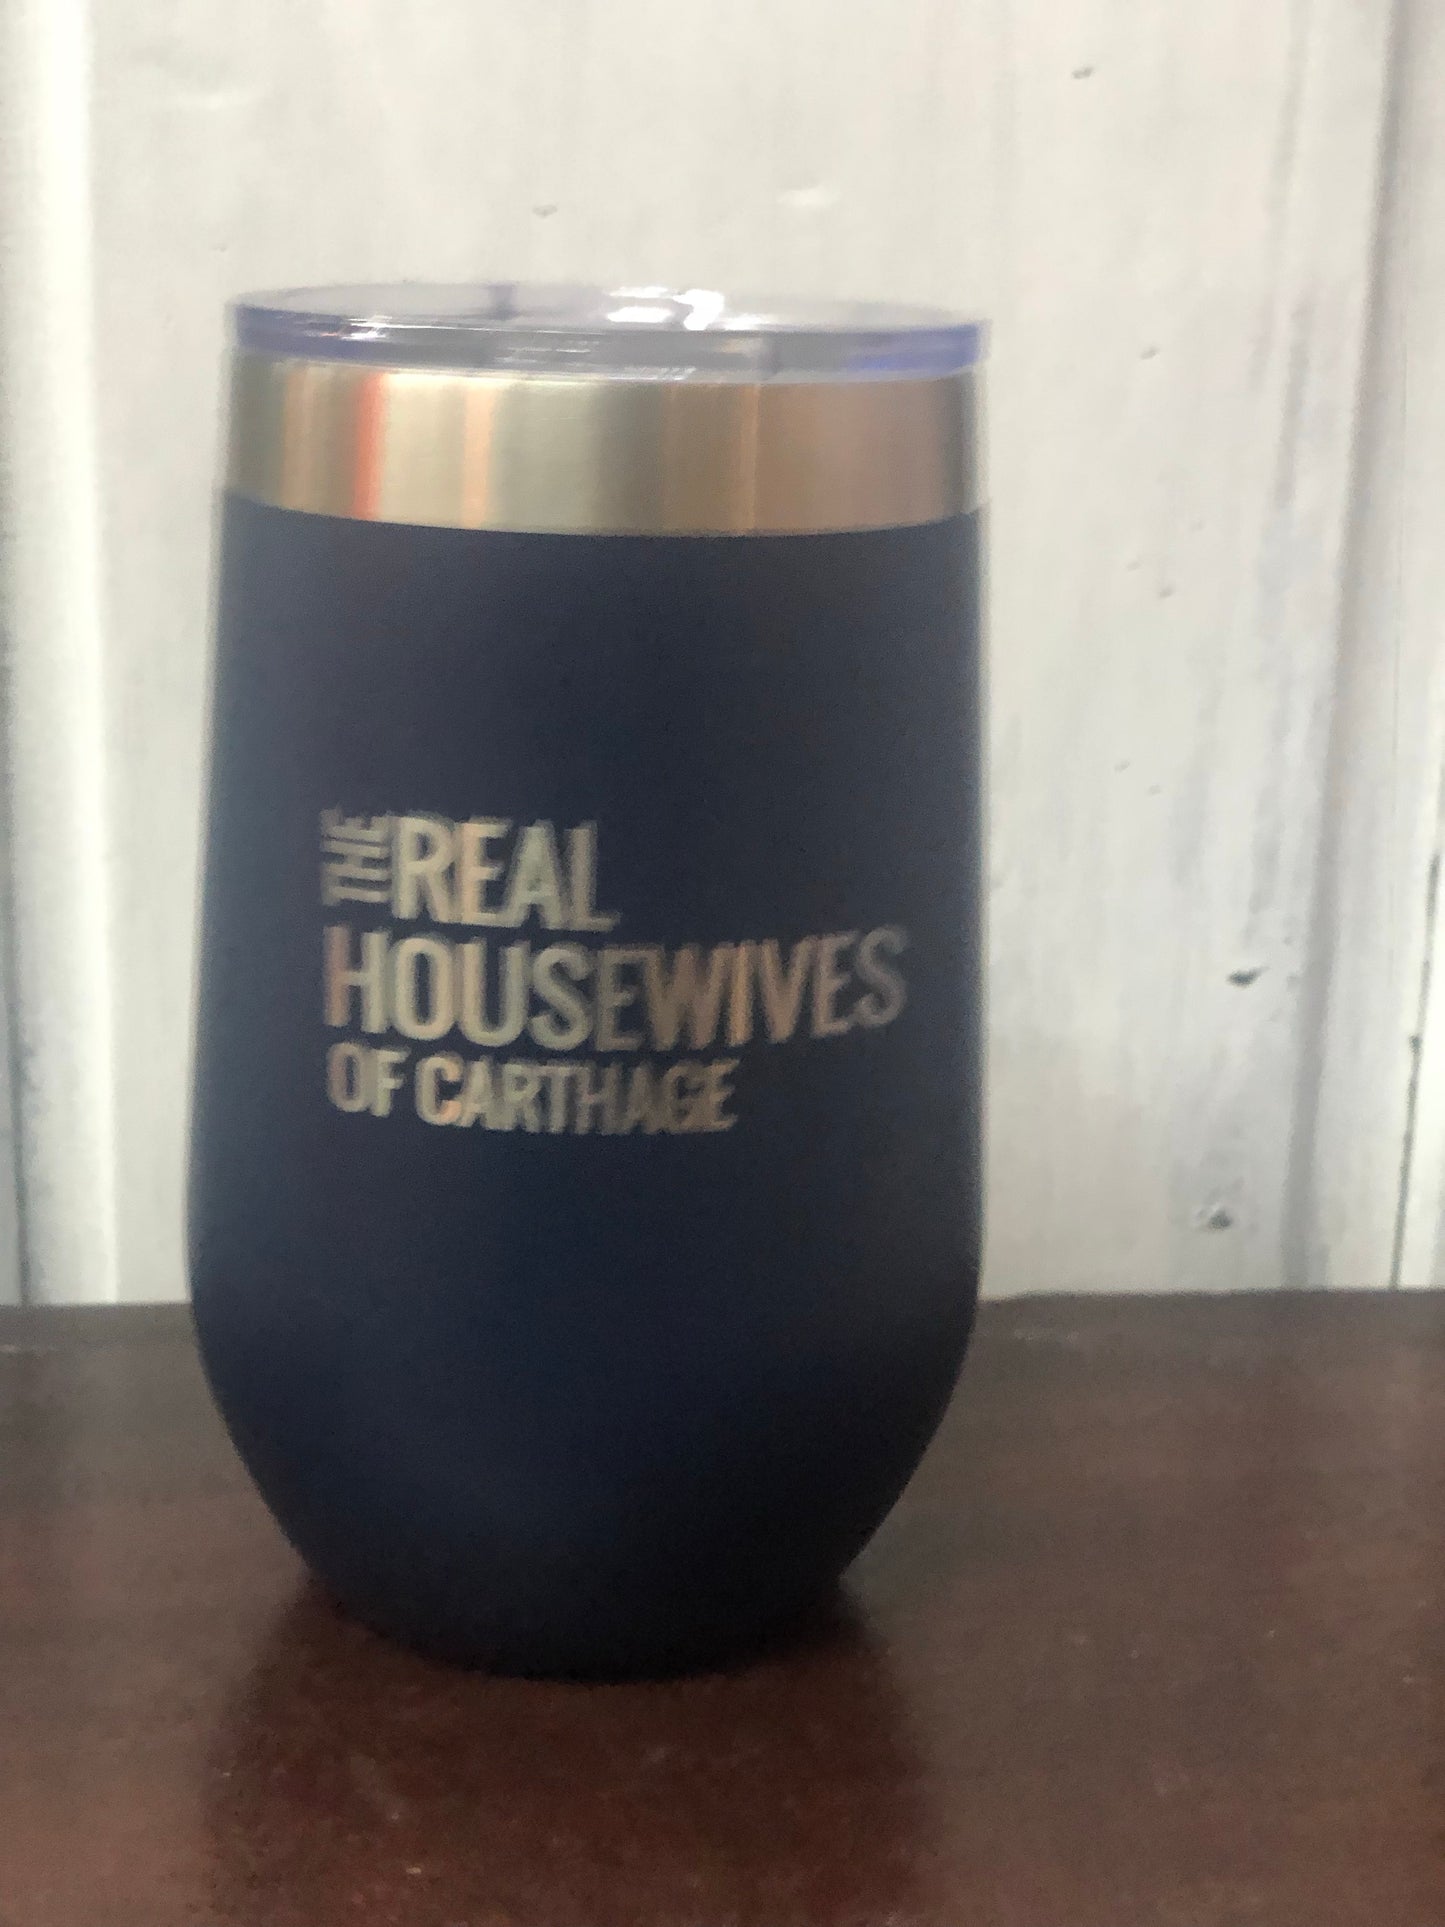 The Real Housewives of Carthage 16 oz. Wine Tumbler - Navy